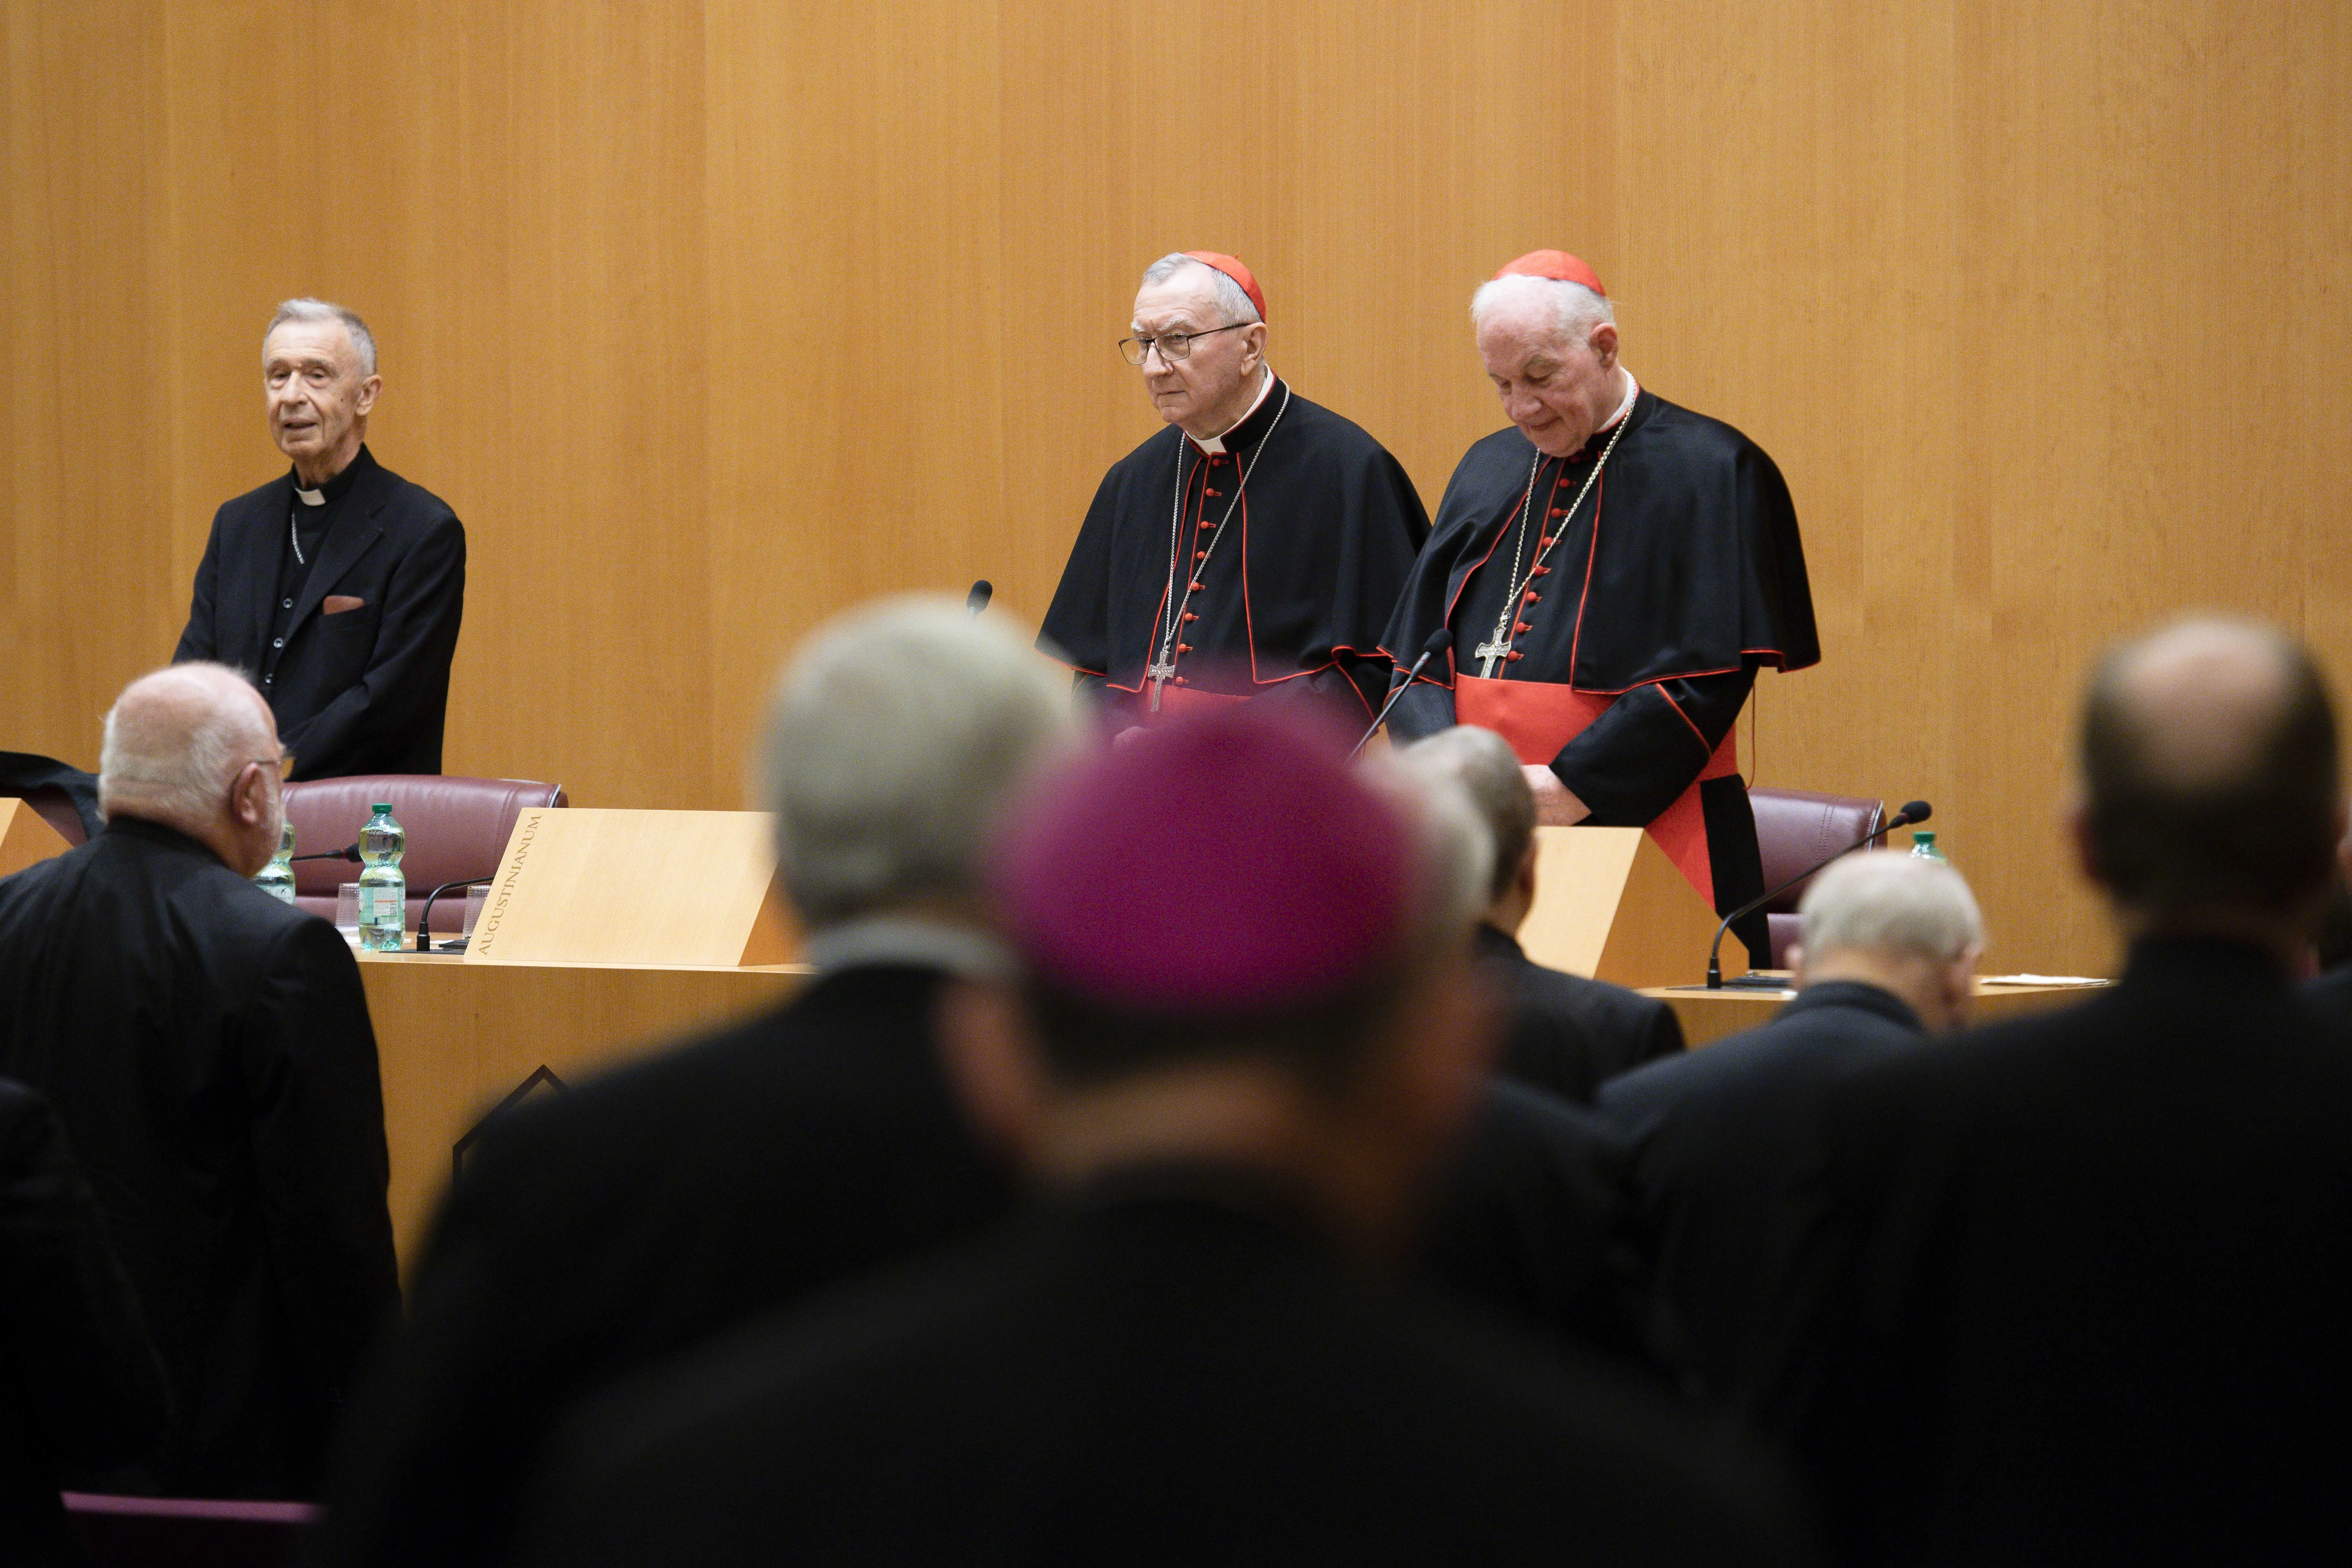 Facing the German bishops in Rome, Nov. 18, 2022: Cardinal Luis Ladaria Ferrer, SJ, prefect of the Dicastery of the Doctrine of the Faith; Cardinal Pietro Parolin, secretary of state; and Cardinal Marc Ouellet, PSS, prefect of the Dicastery of Bishops (from left).?w=200&h=150